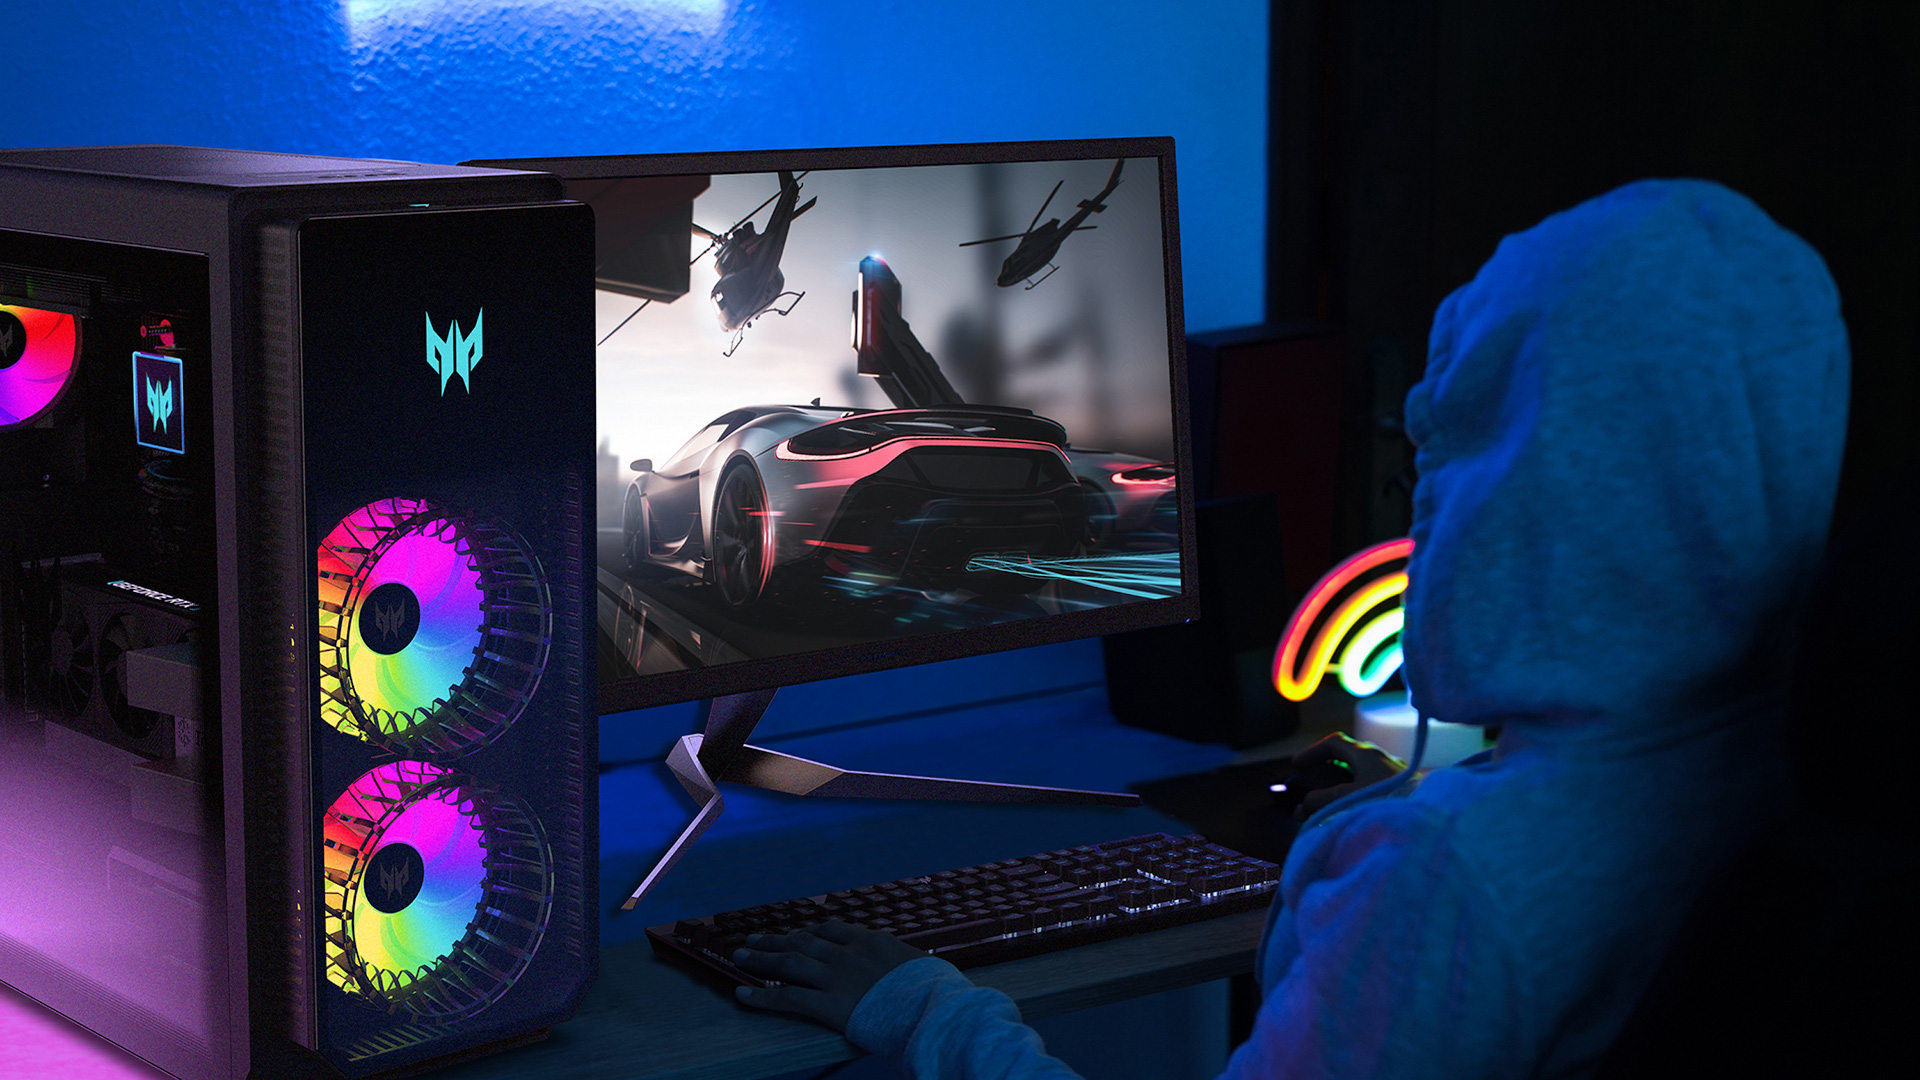 An Acer Predator Orion 7000 gaming PC displayed on a desk next to a monitor